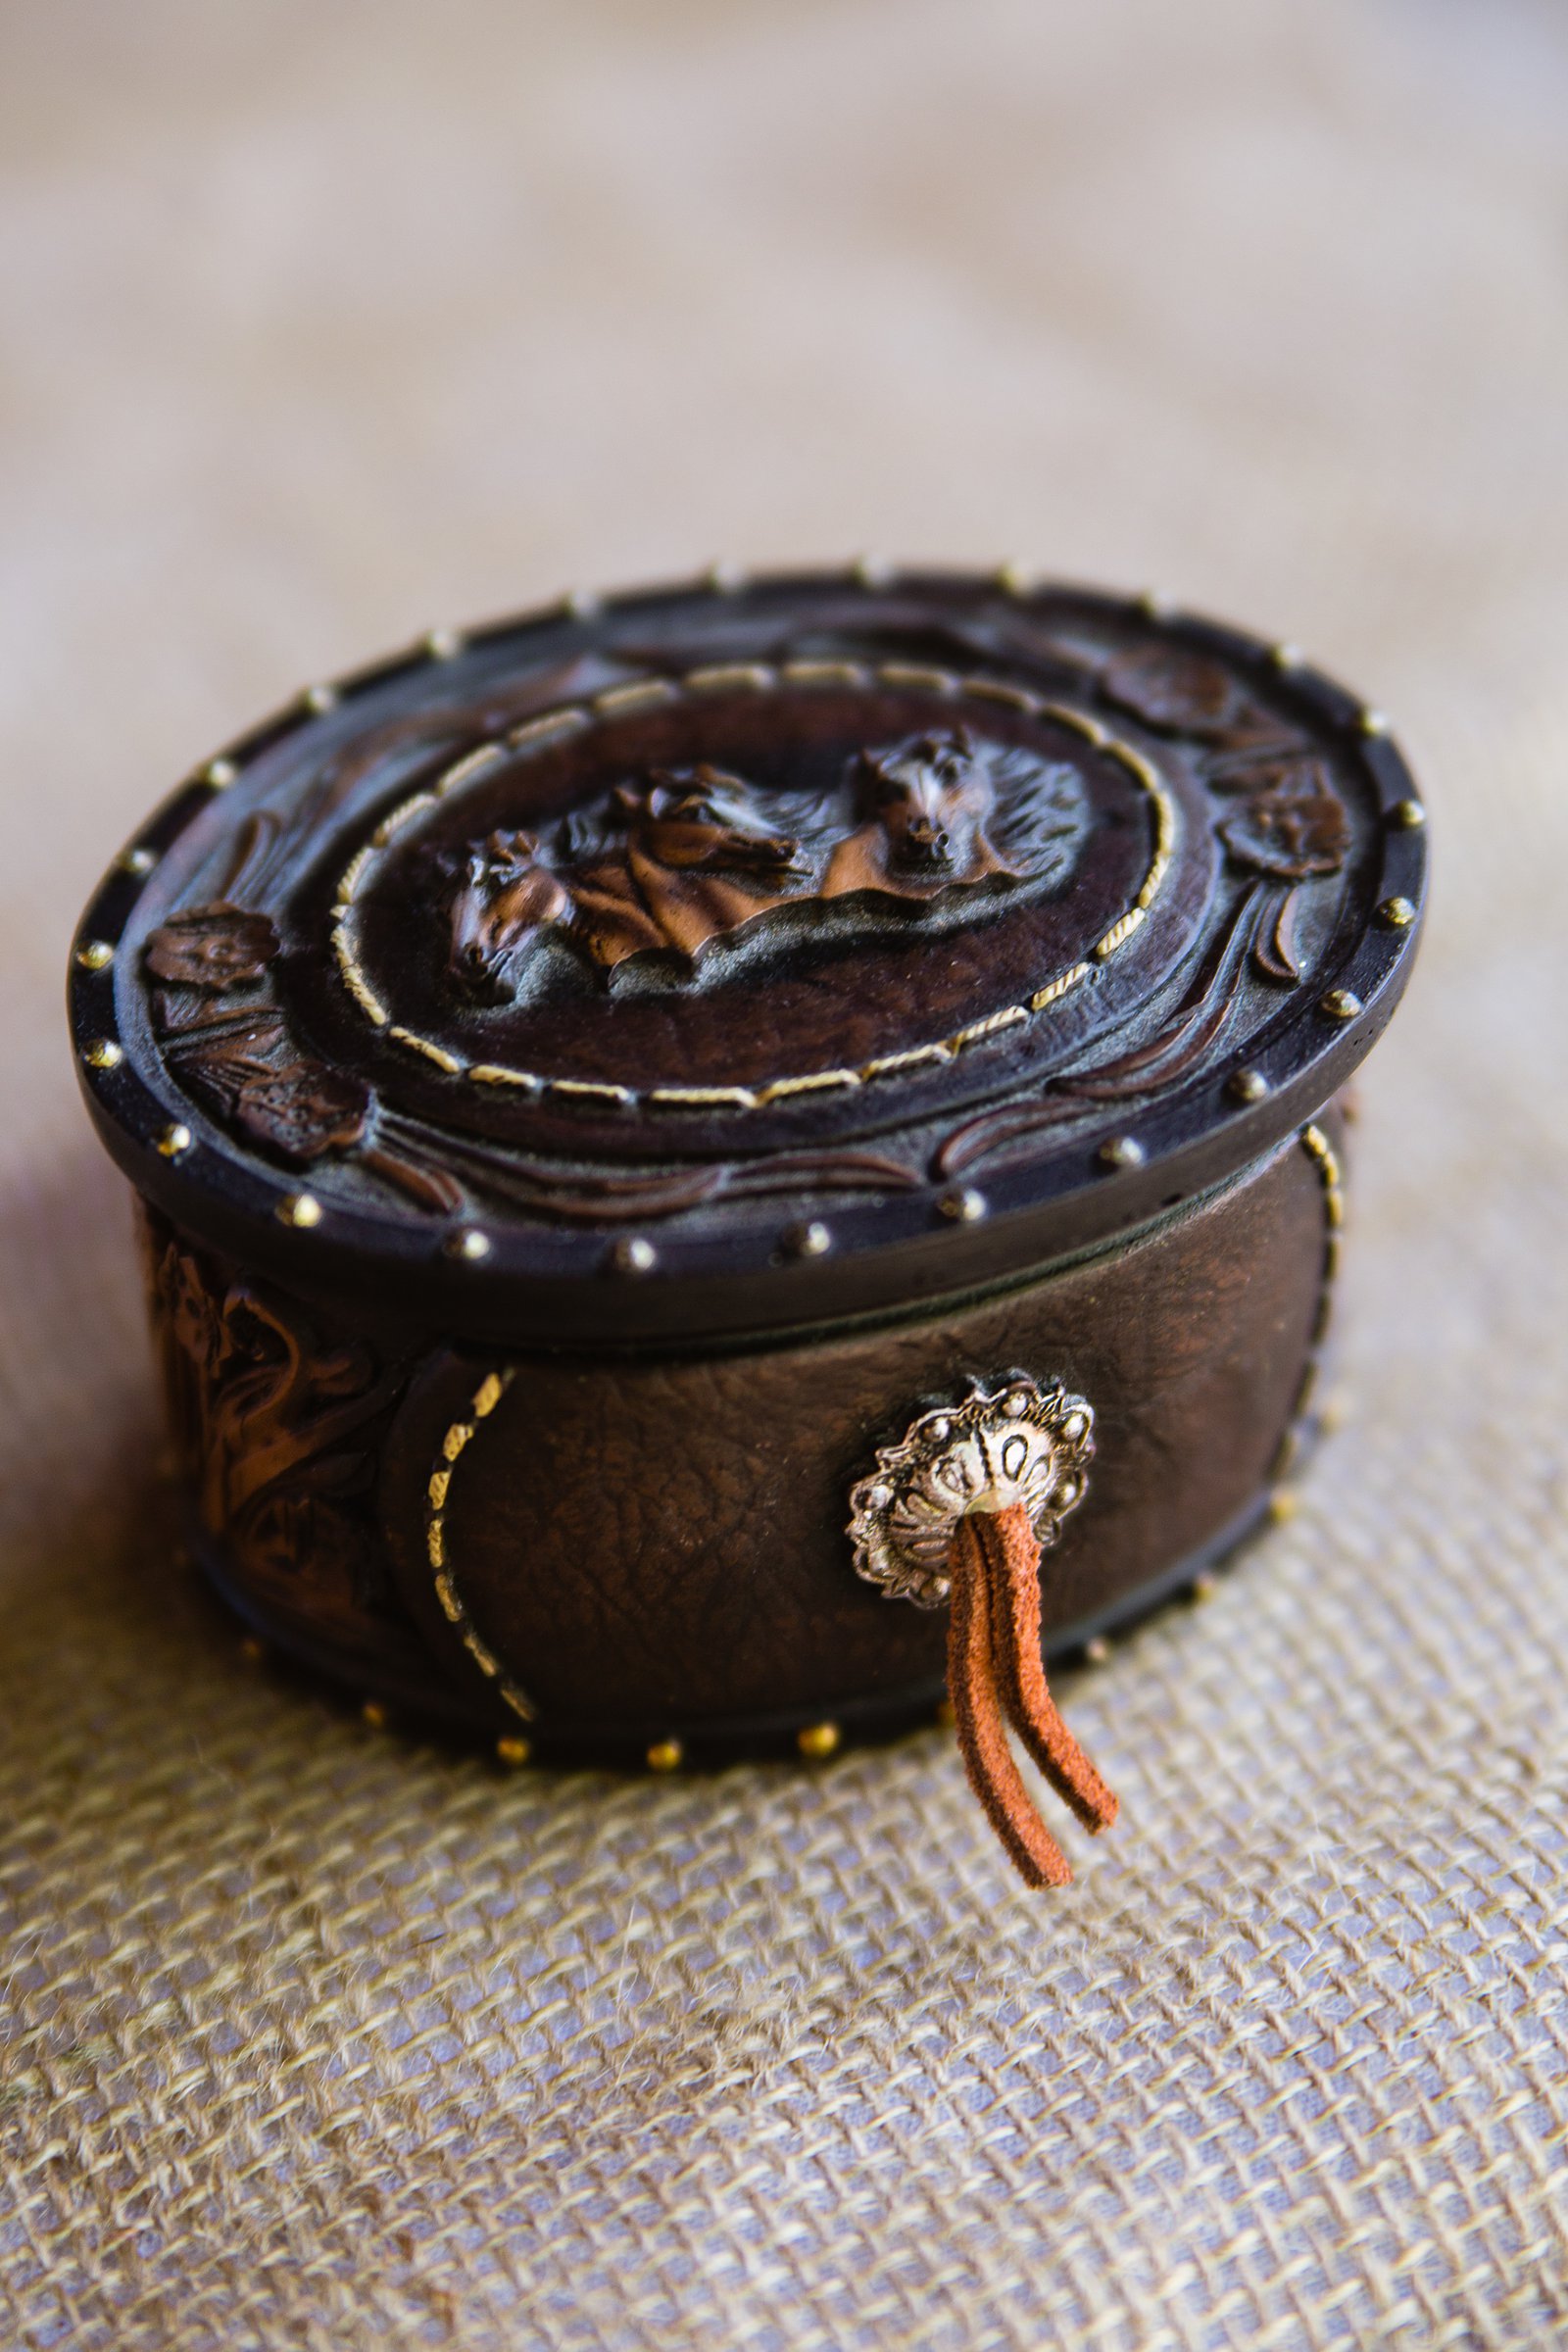 Unique rustic horse ring box by PMA Photography.